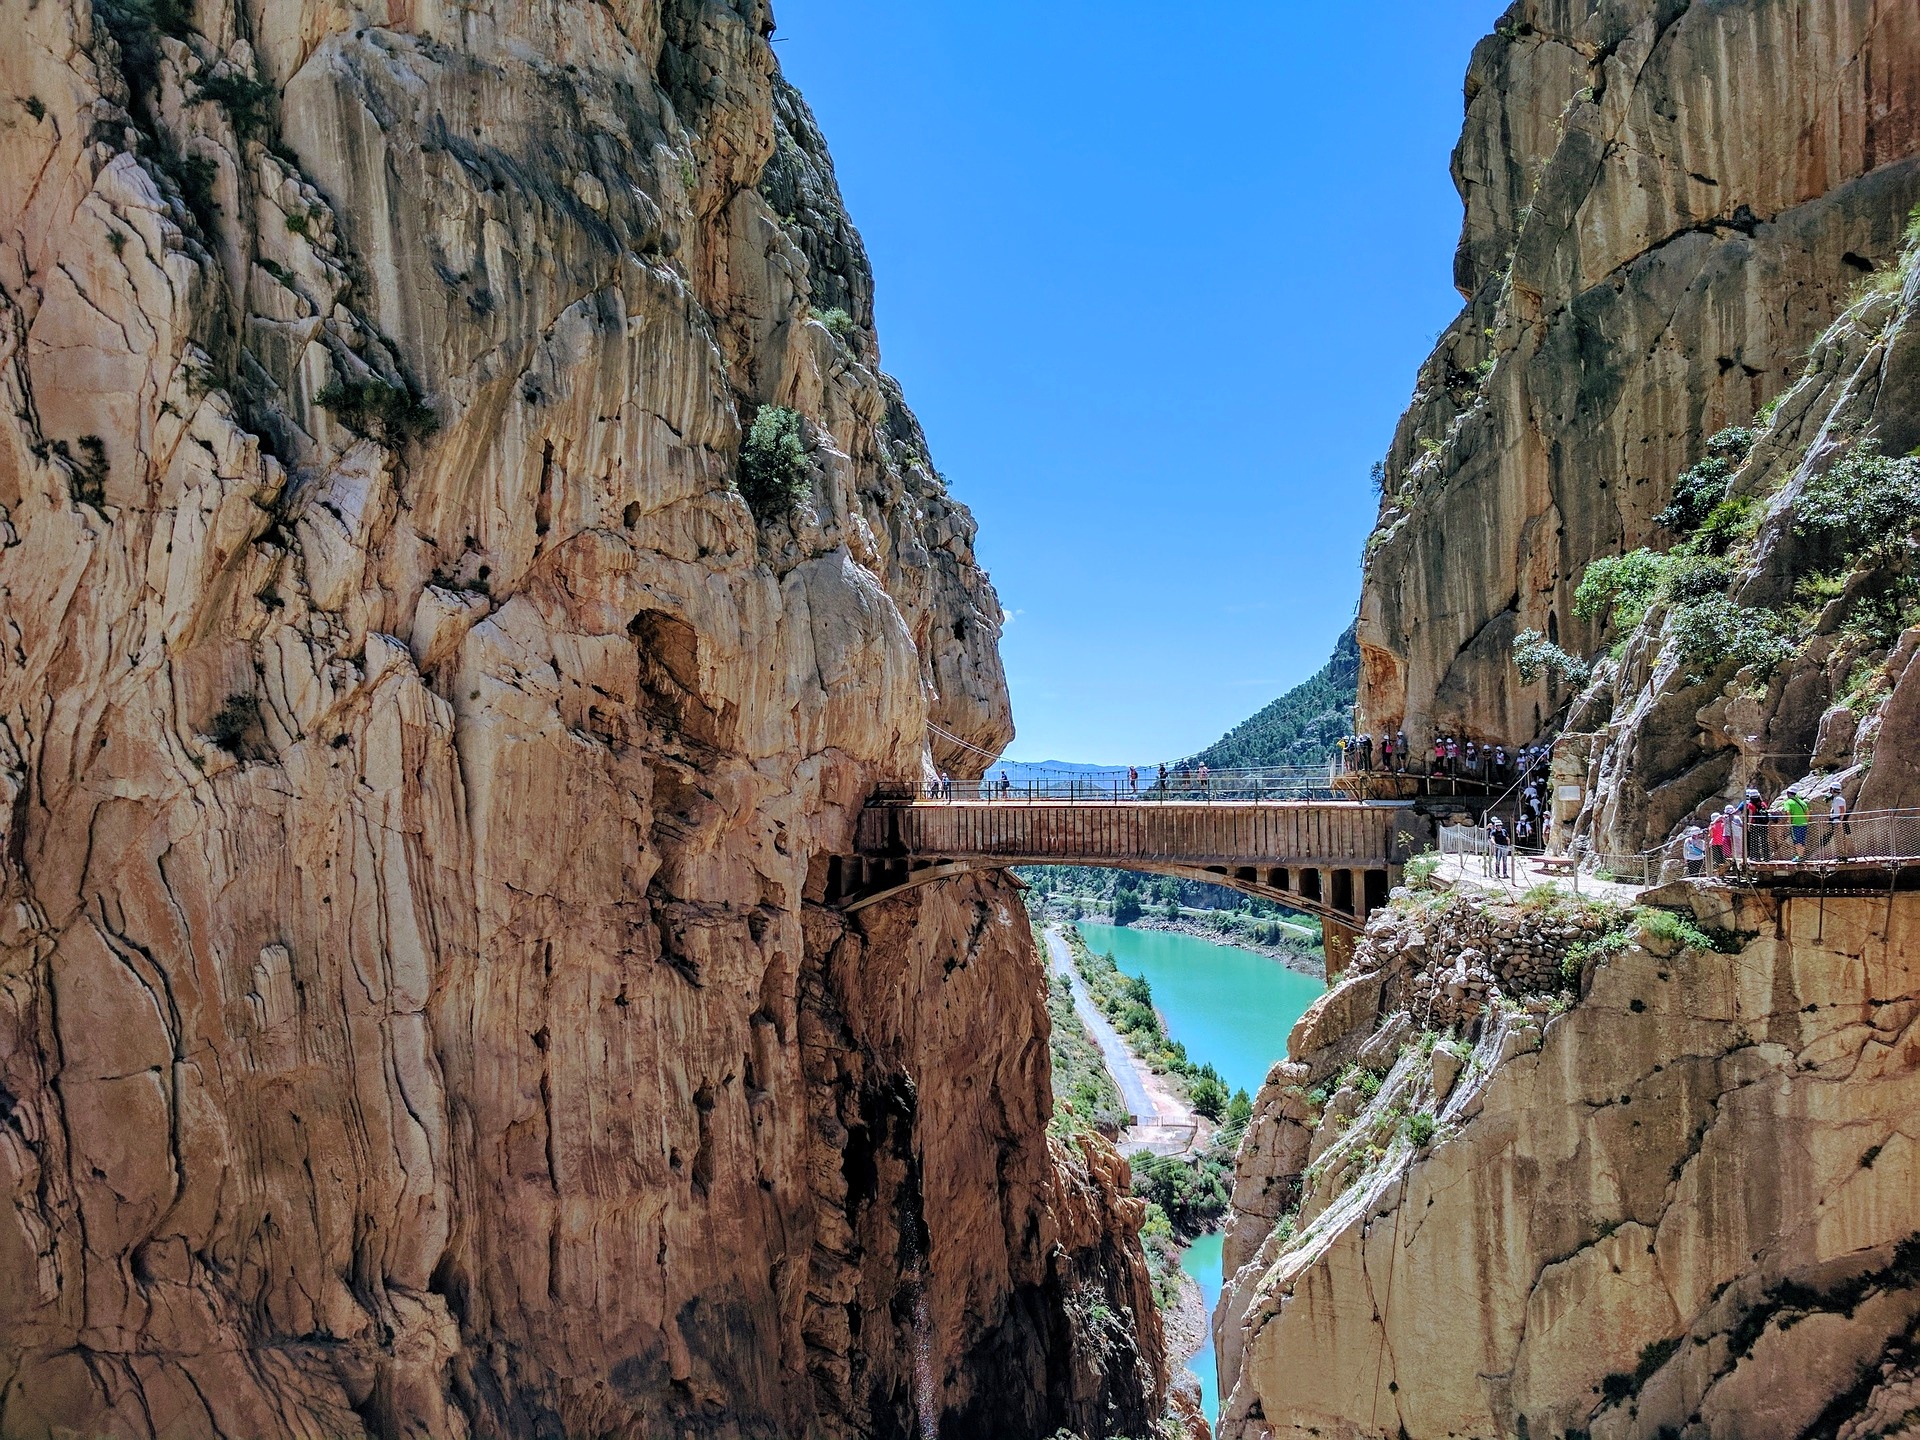 The Caminito del Rey – The King’s Little Pathway